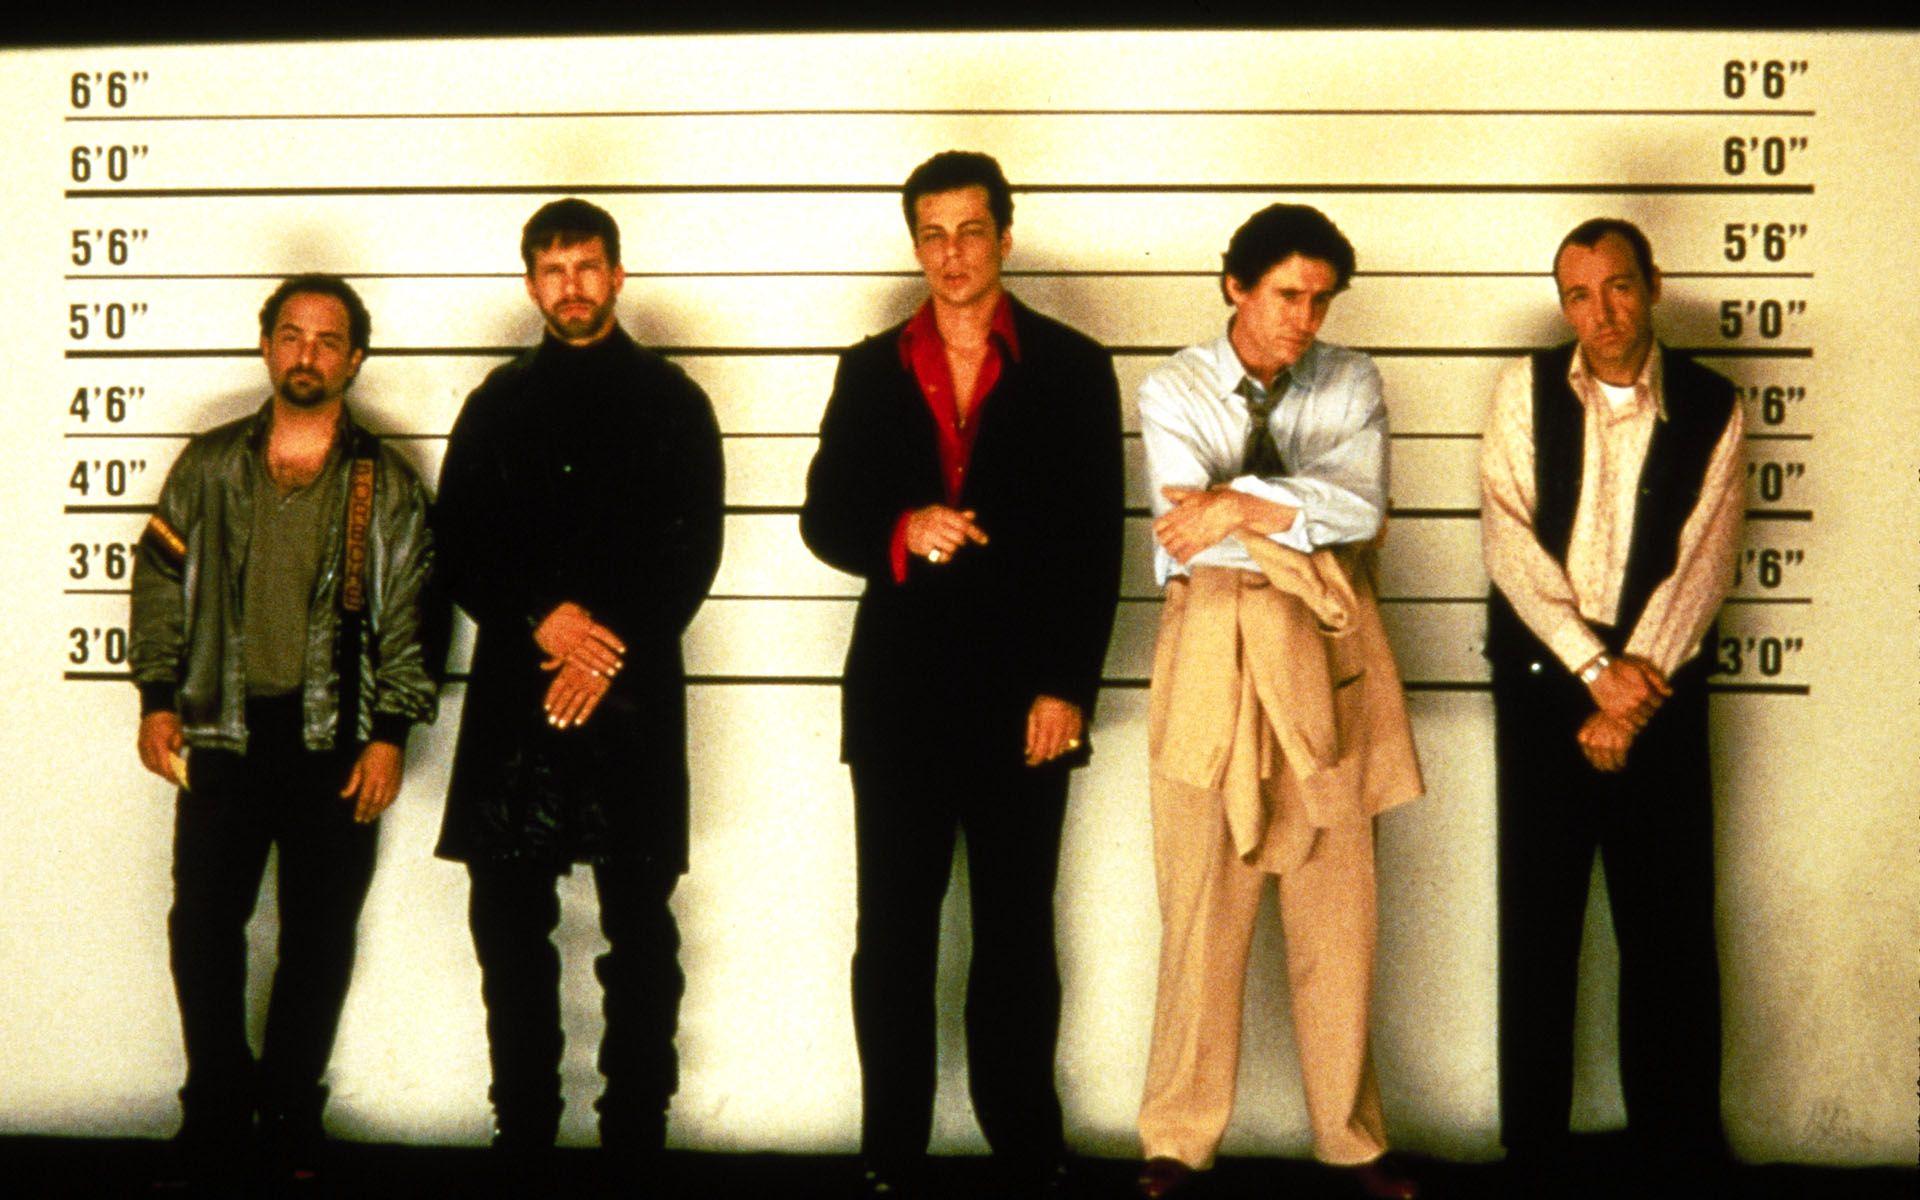 The Usual Suspects Wallpaper